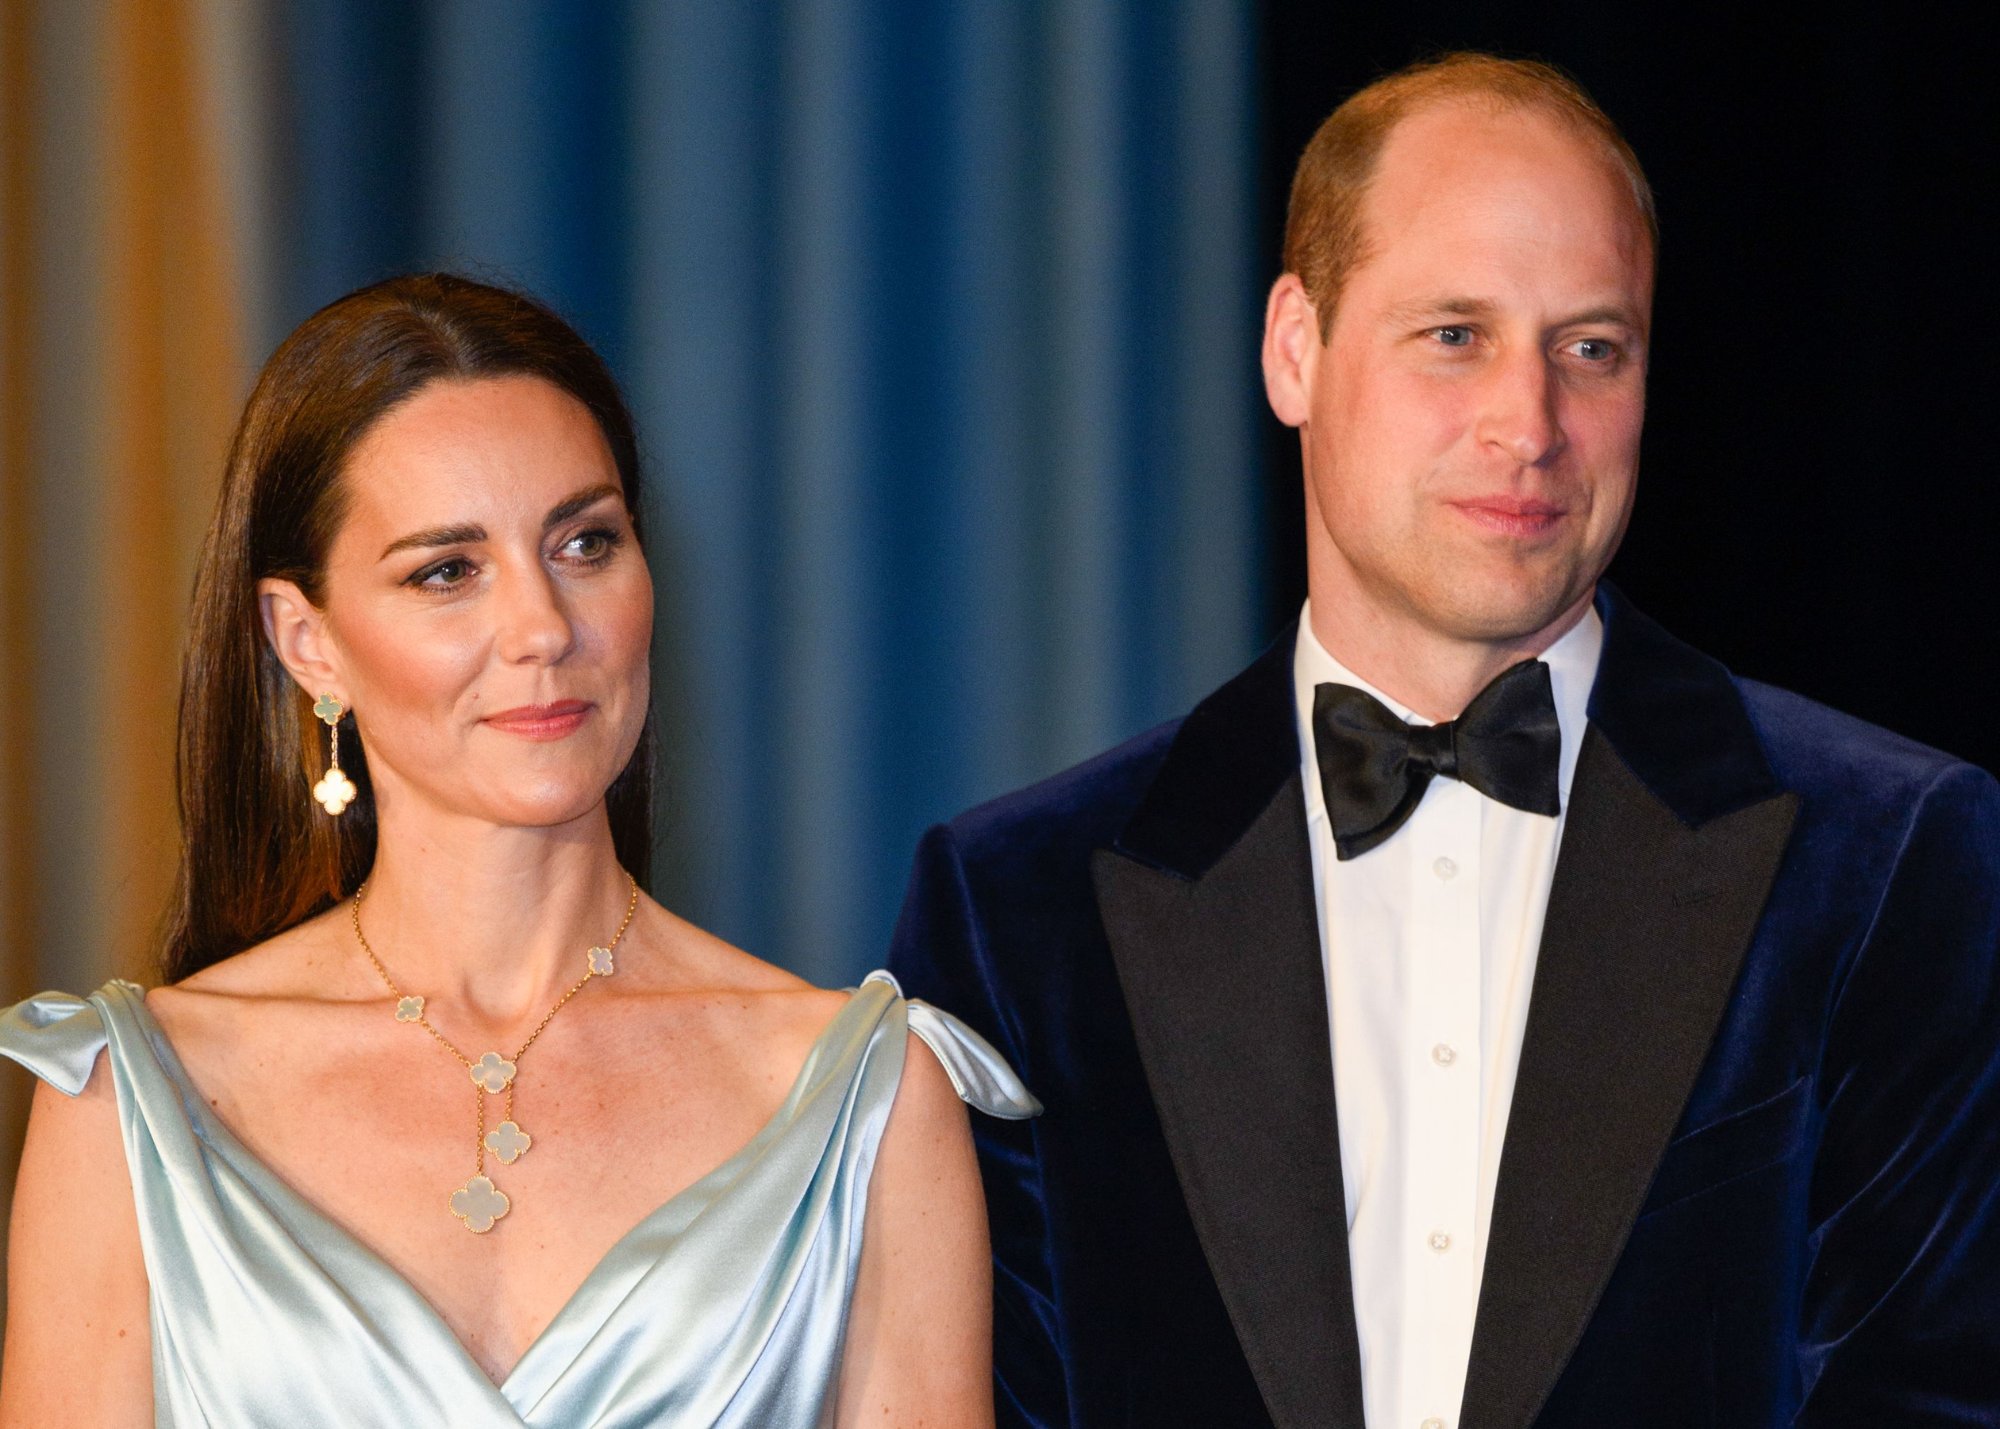 Royal Couple Earned $1.3 Billion In Just One Day